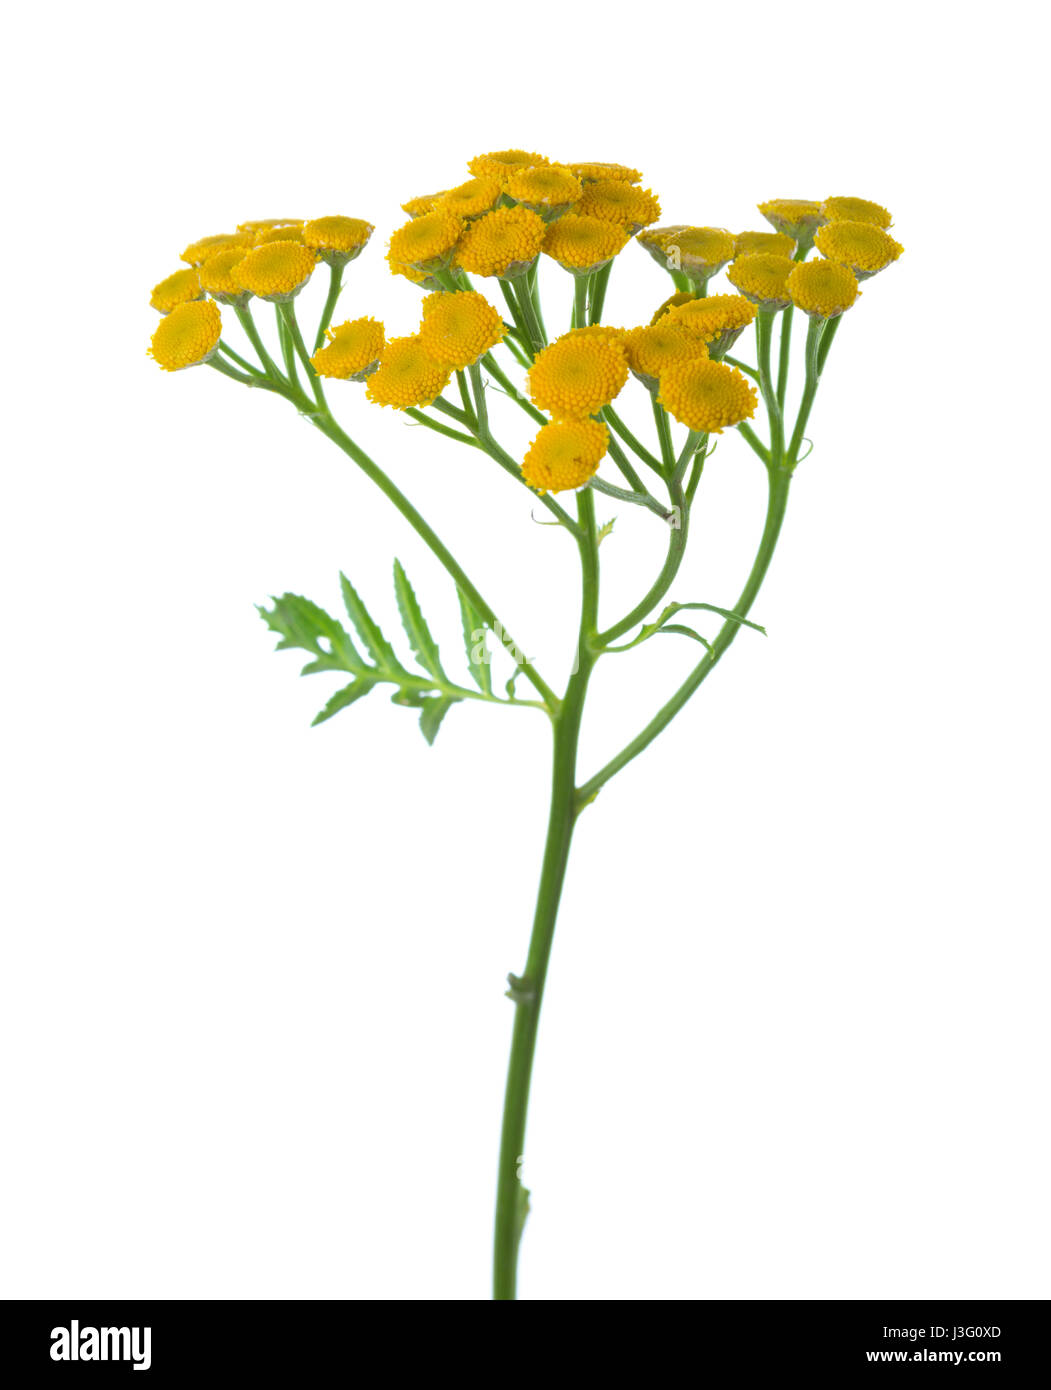 Yellow Tansy (Tanacetum vulgare) flowers isolated on white Stock Photo